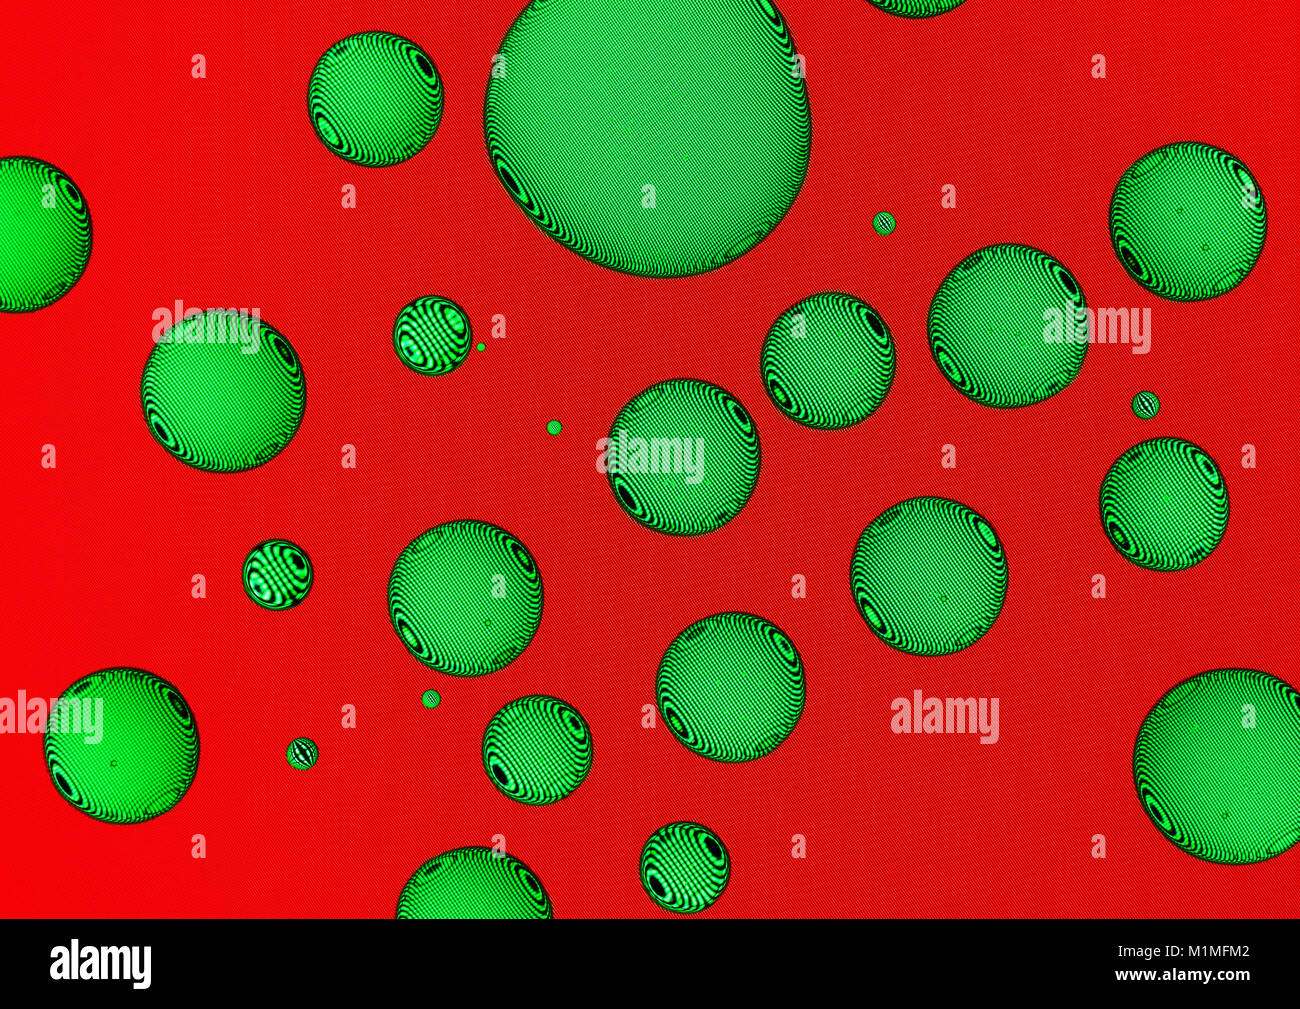 Green water droplets on red screen showing pixels Stock Photo